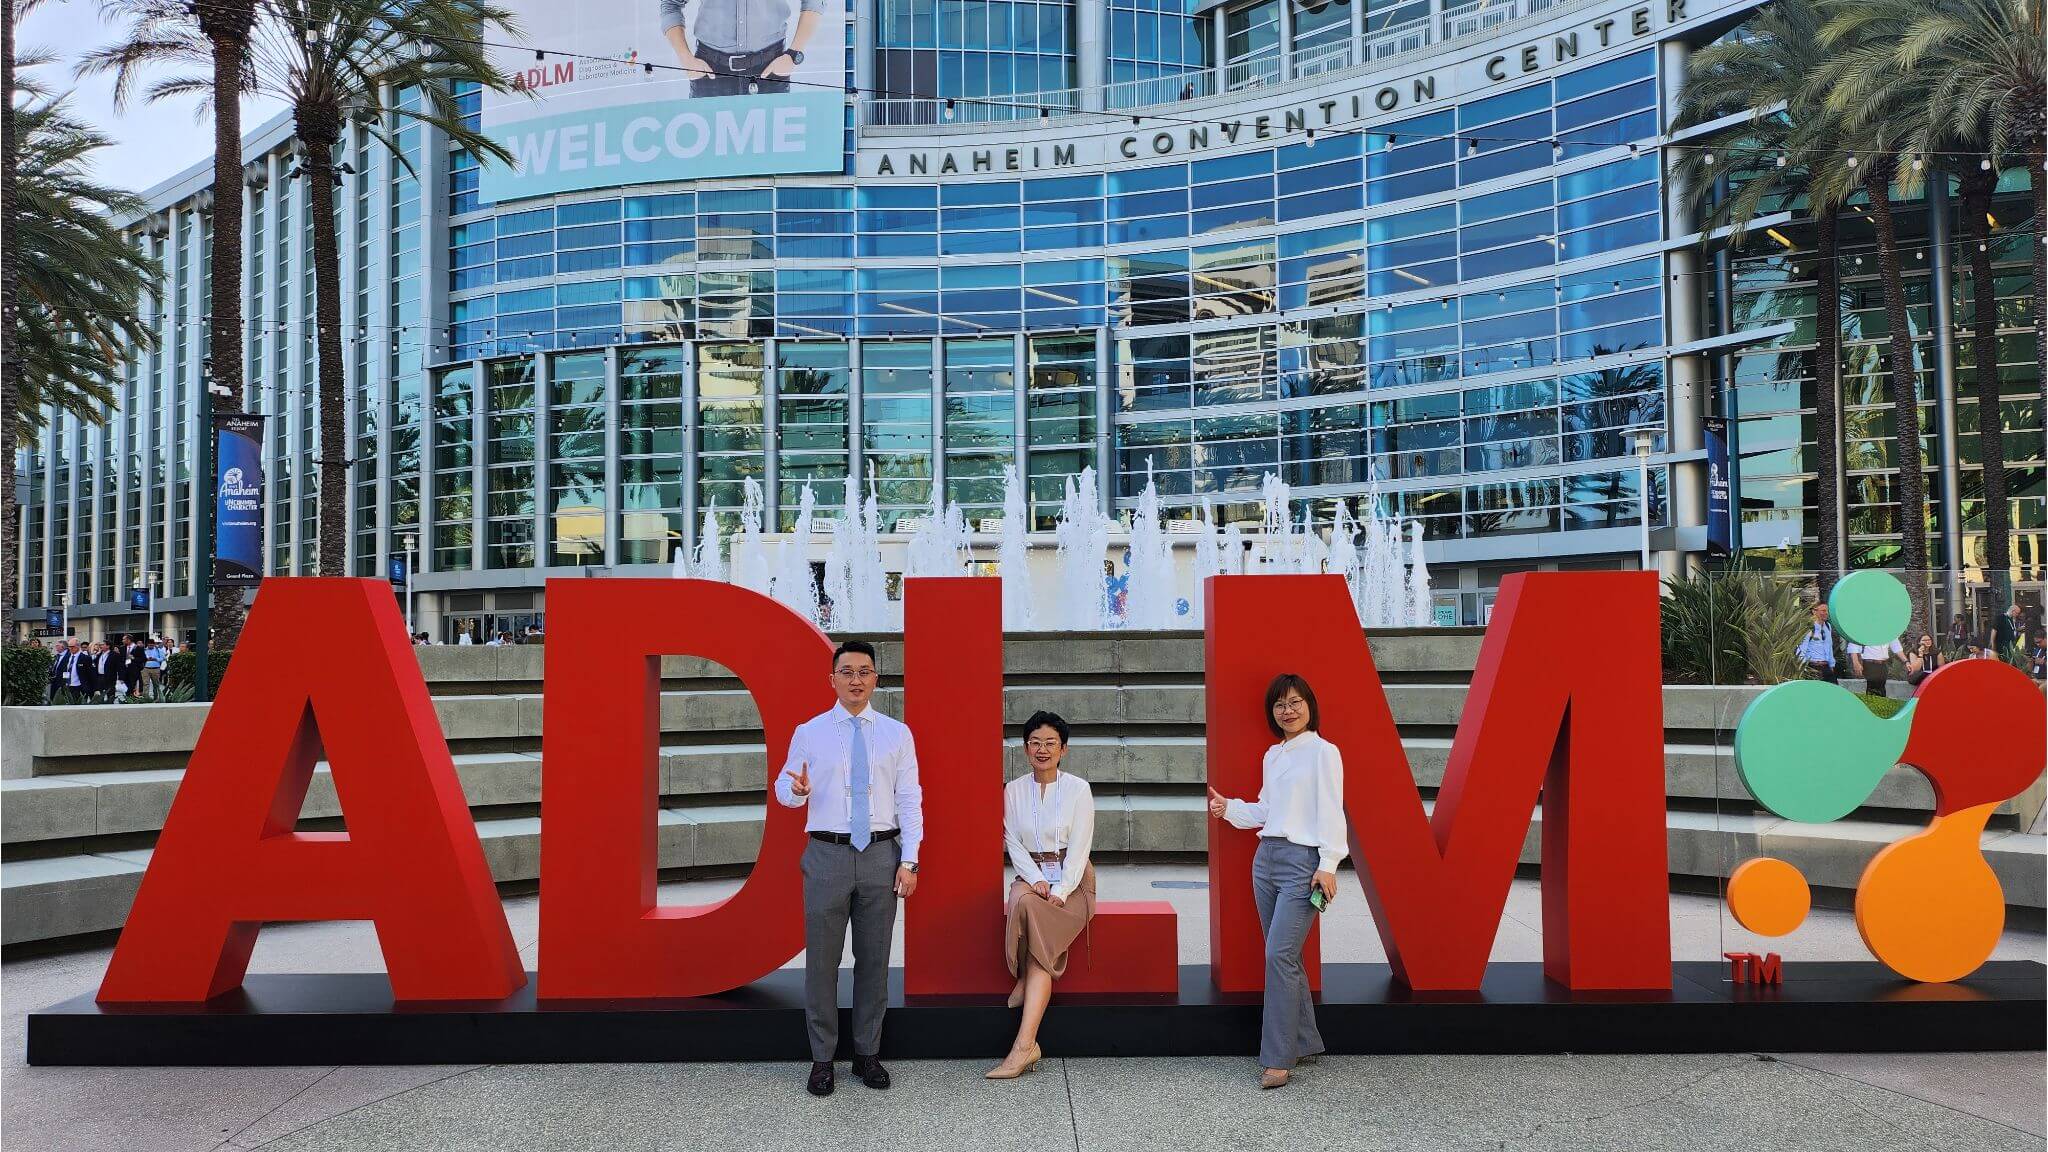 Mantacc Team in front of the ADLM logo